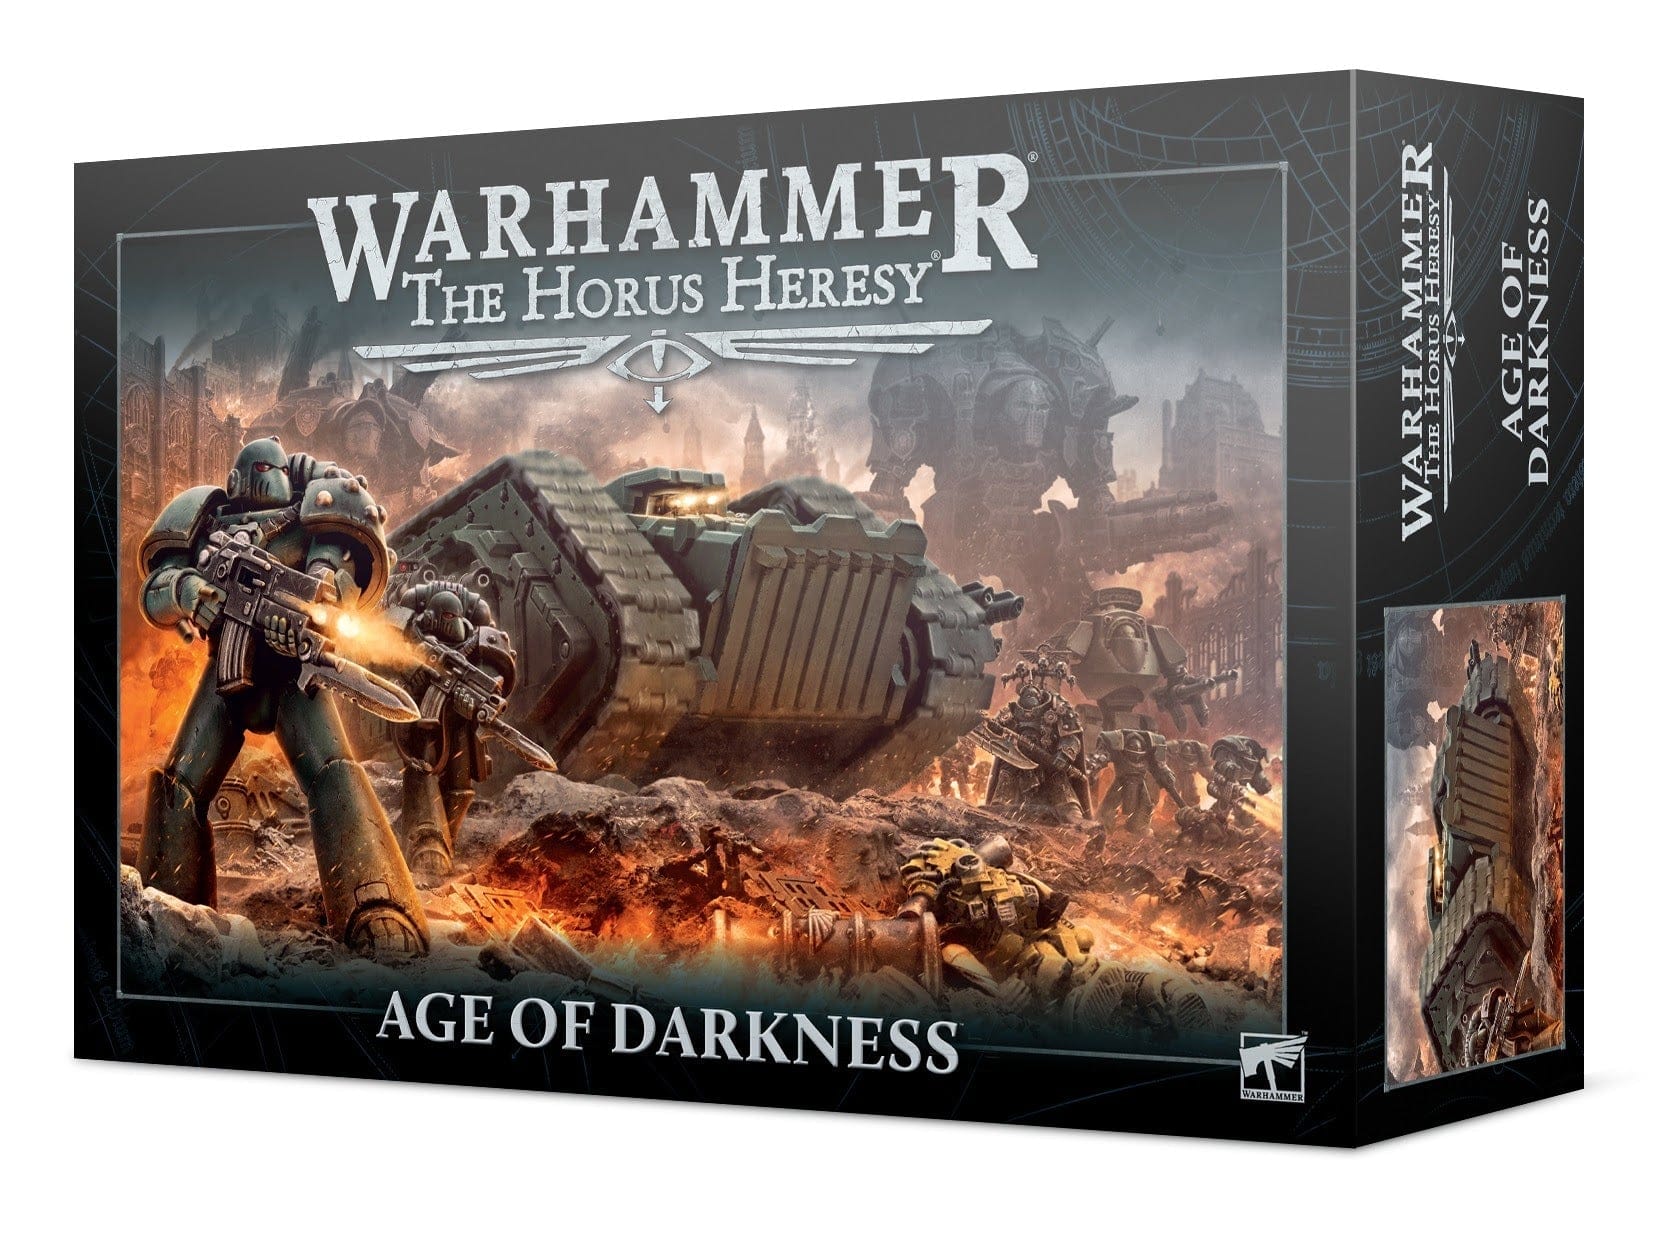 Warhammer: The Horus Heresy – The Age of Darkness